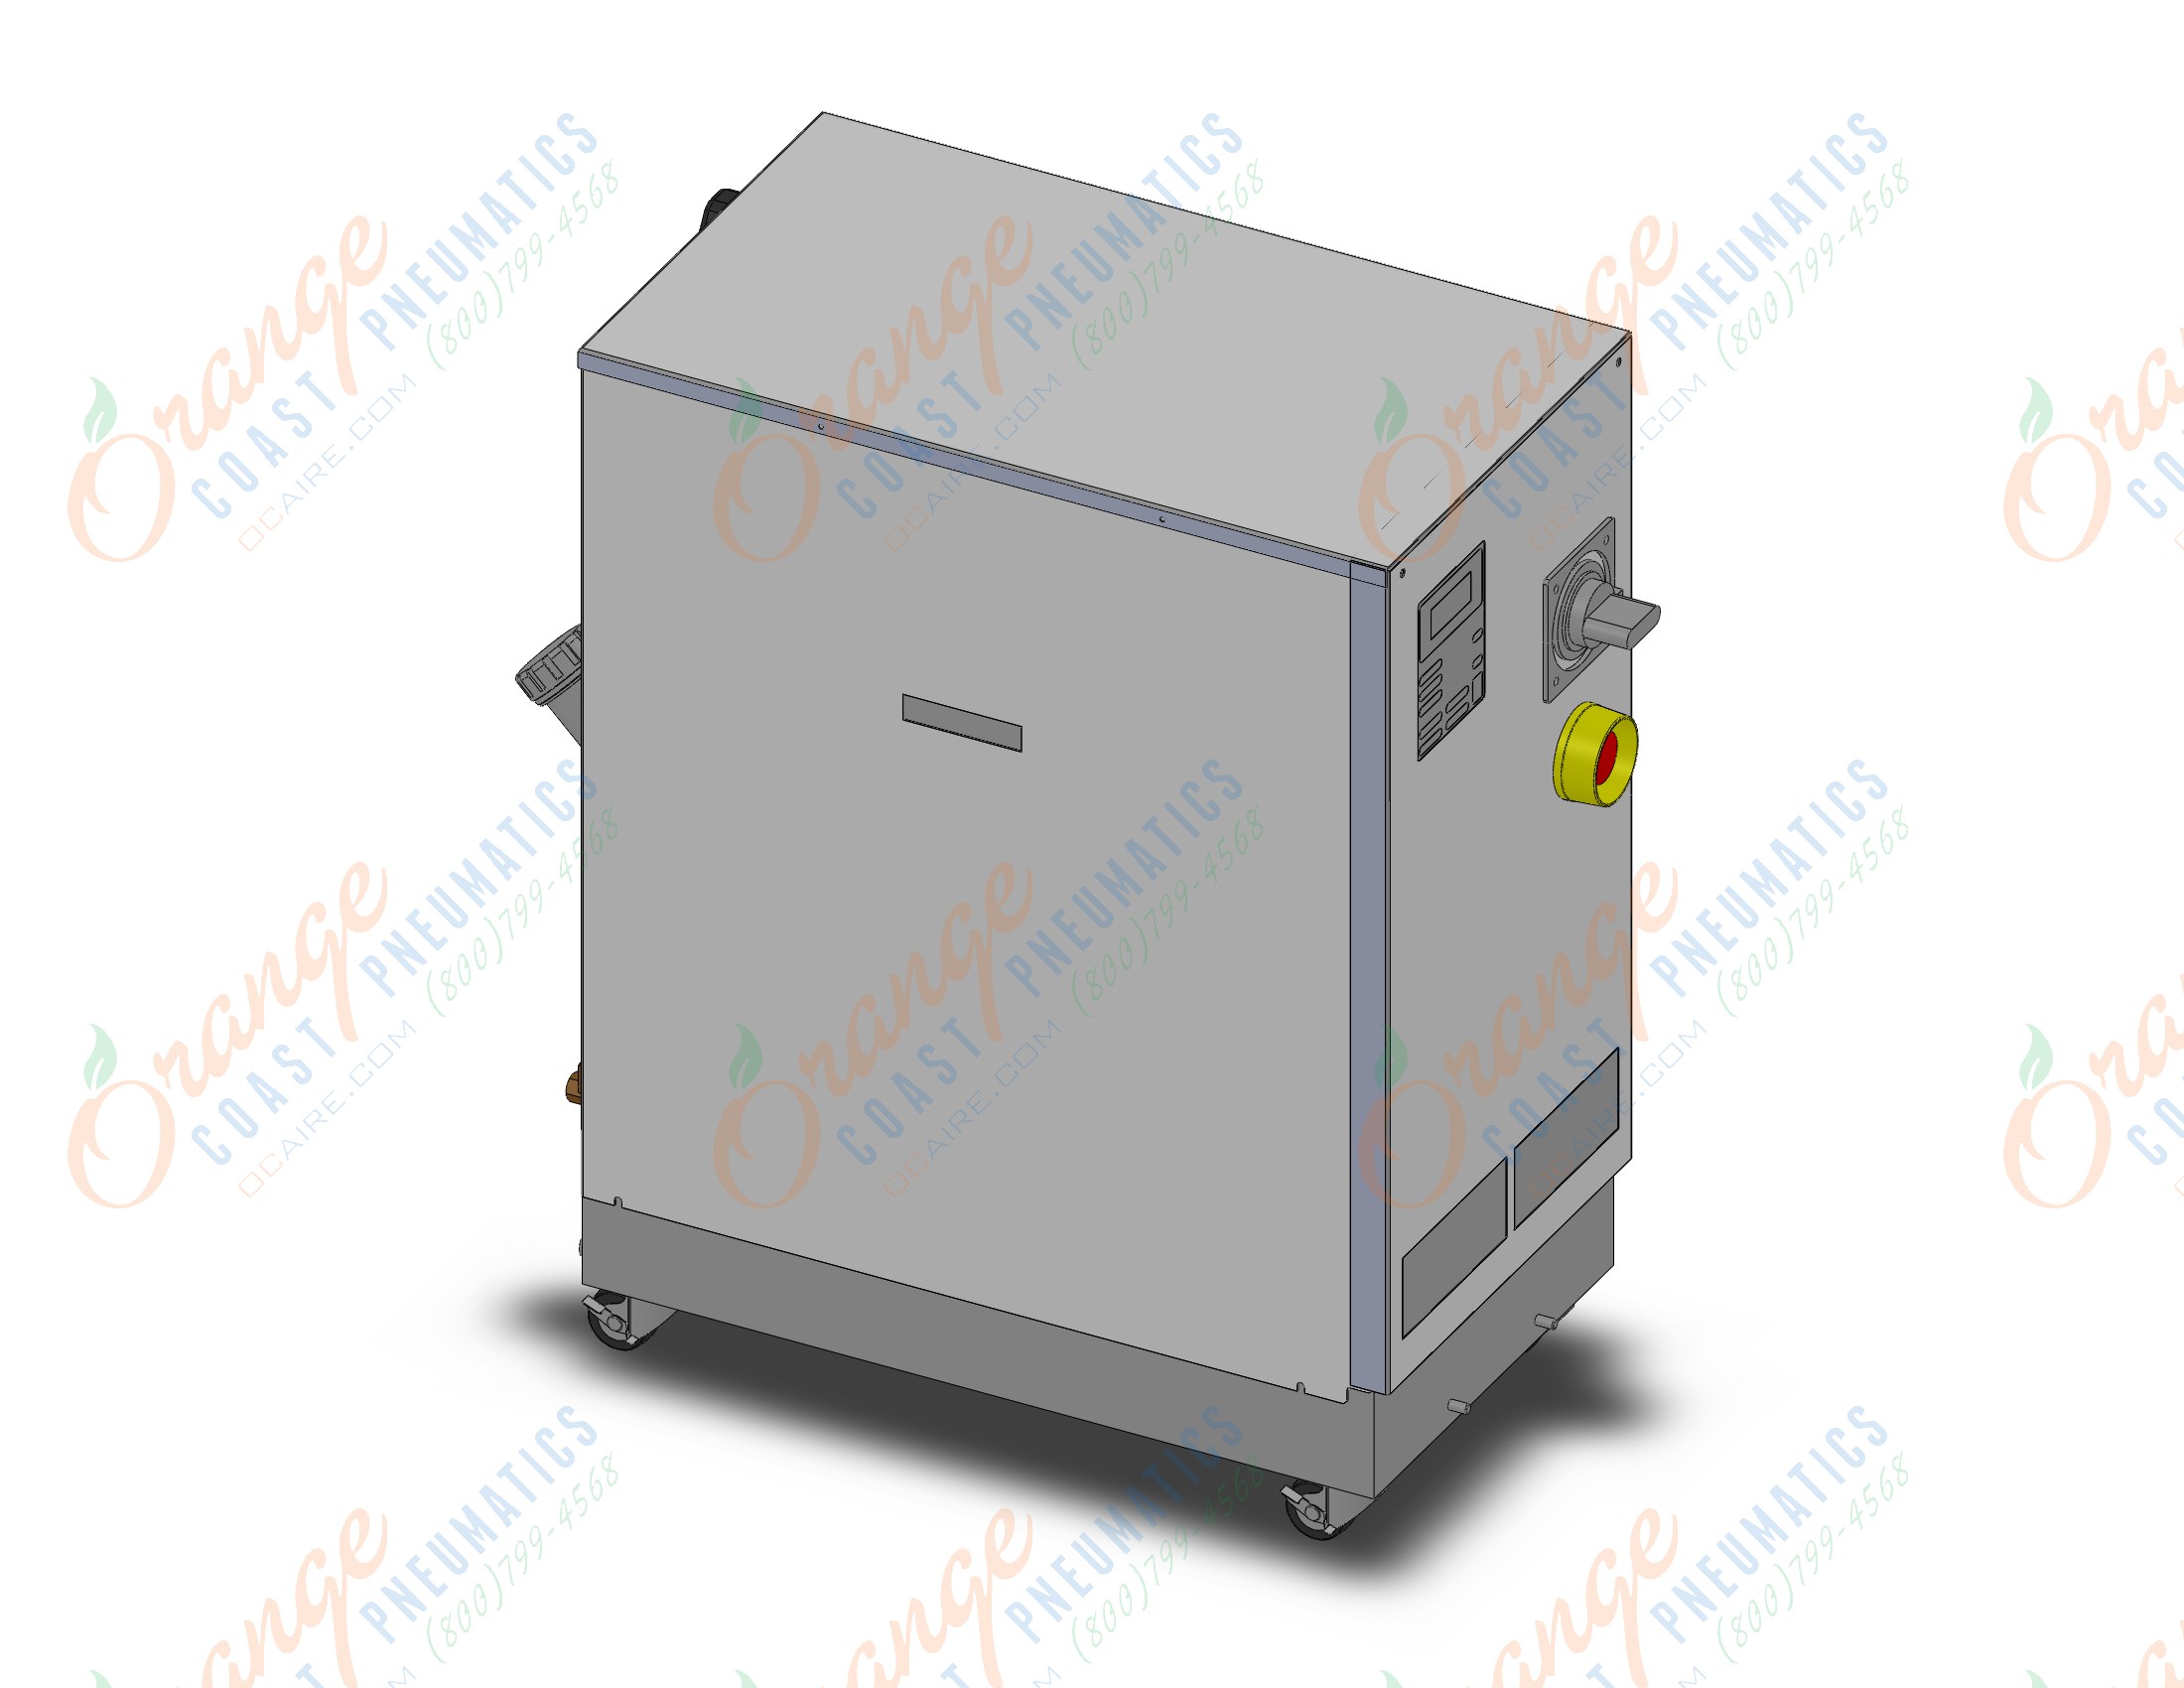 SMC HRW008-H-N water to water heat exchanger, HRZ- THERMO CHILLER